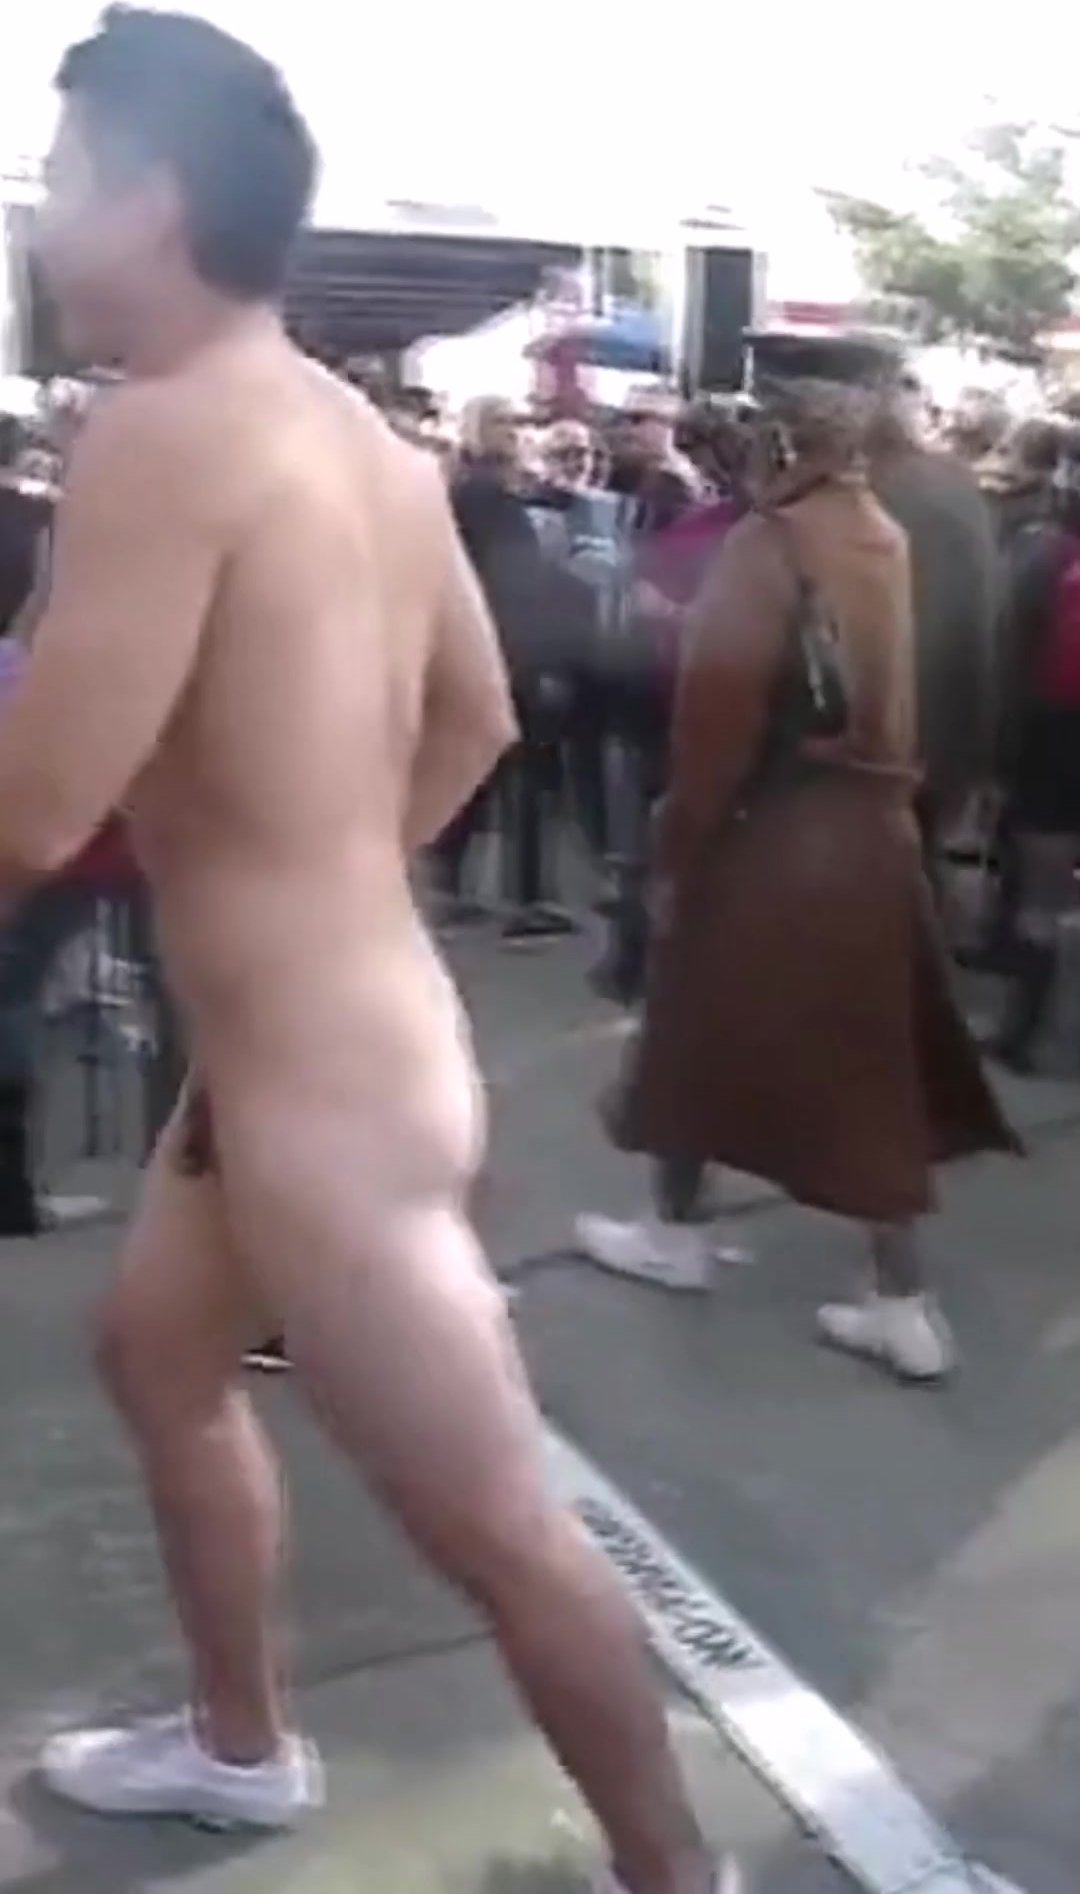 Hot young guy naked in public